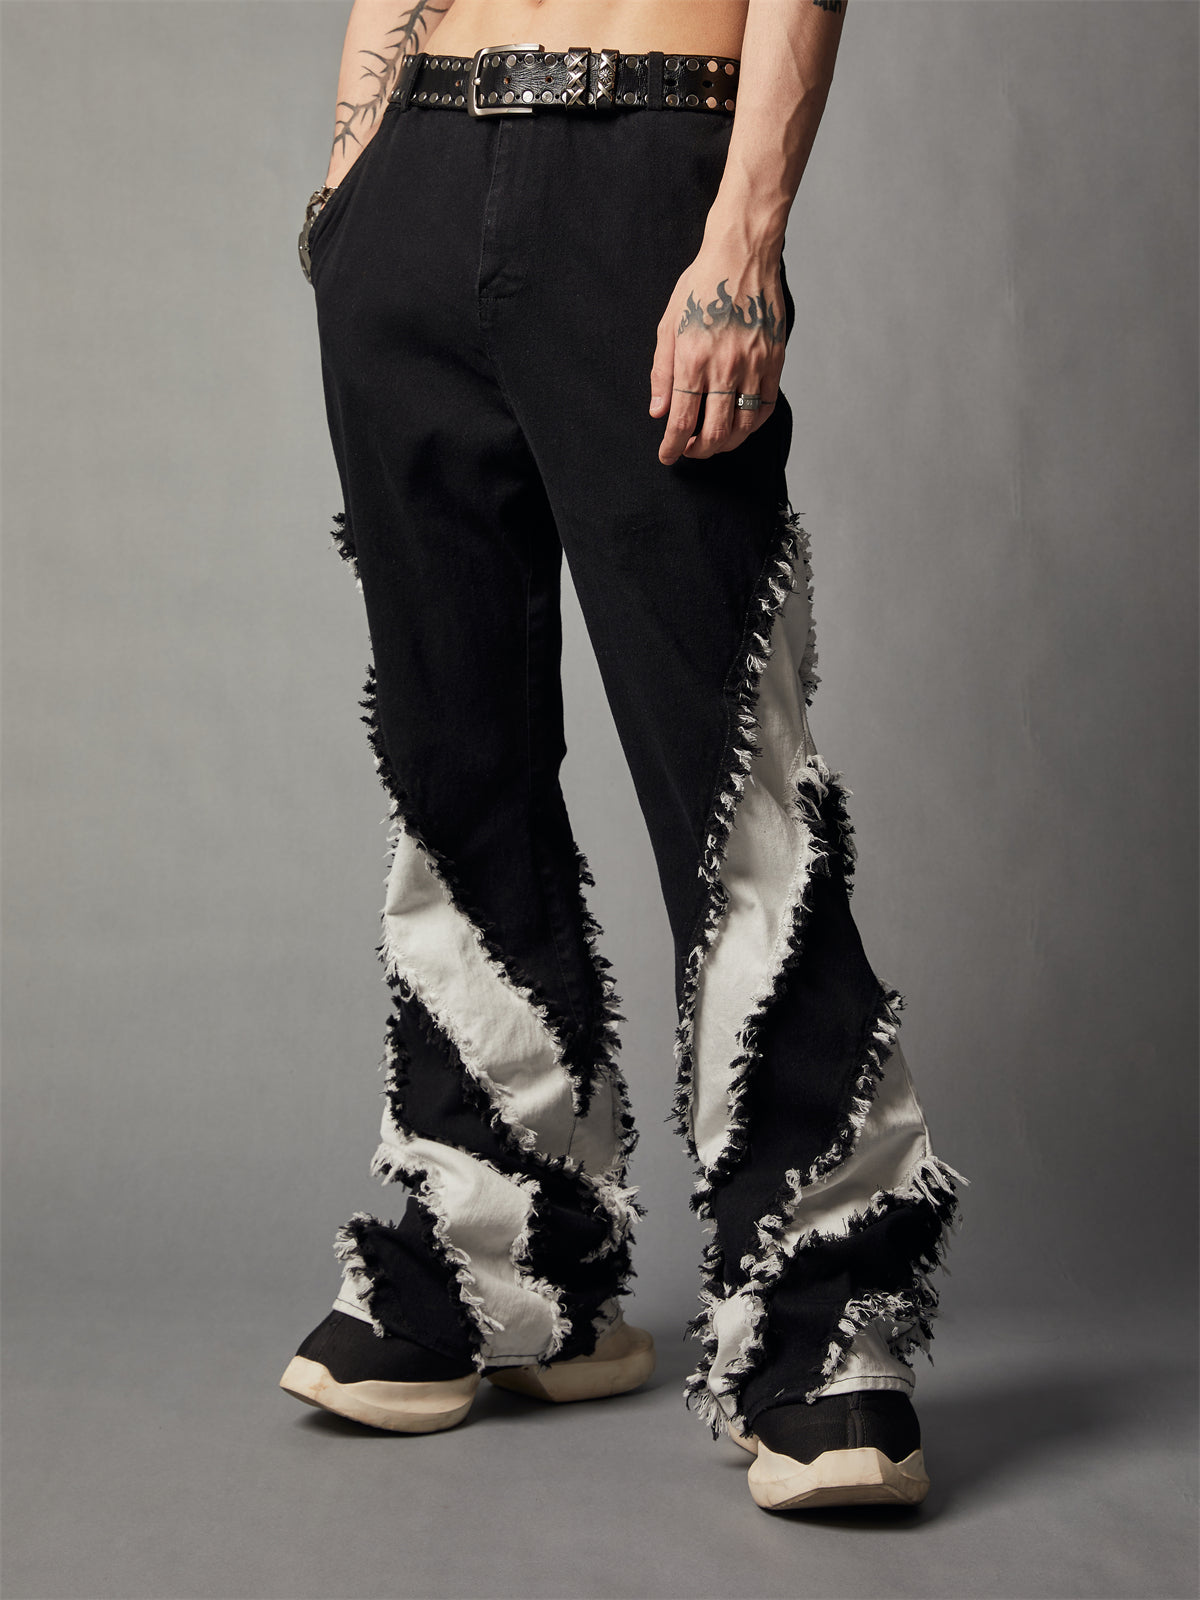 【23s August.】Black And White Paneled Frayed Jeans